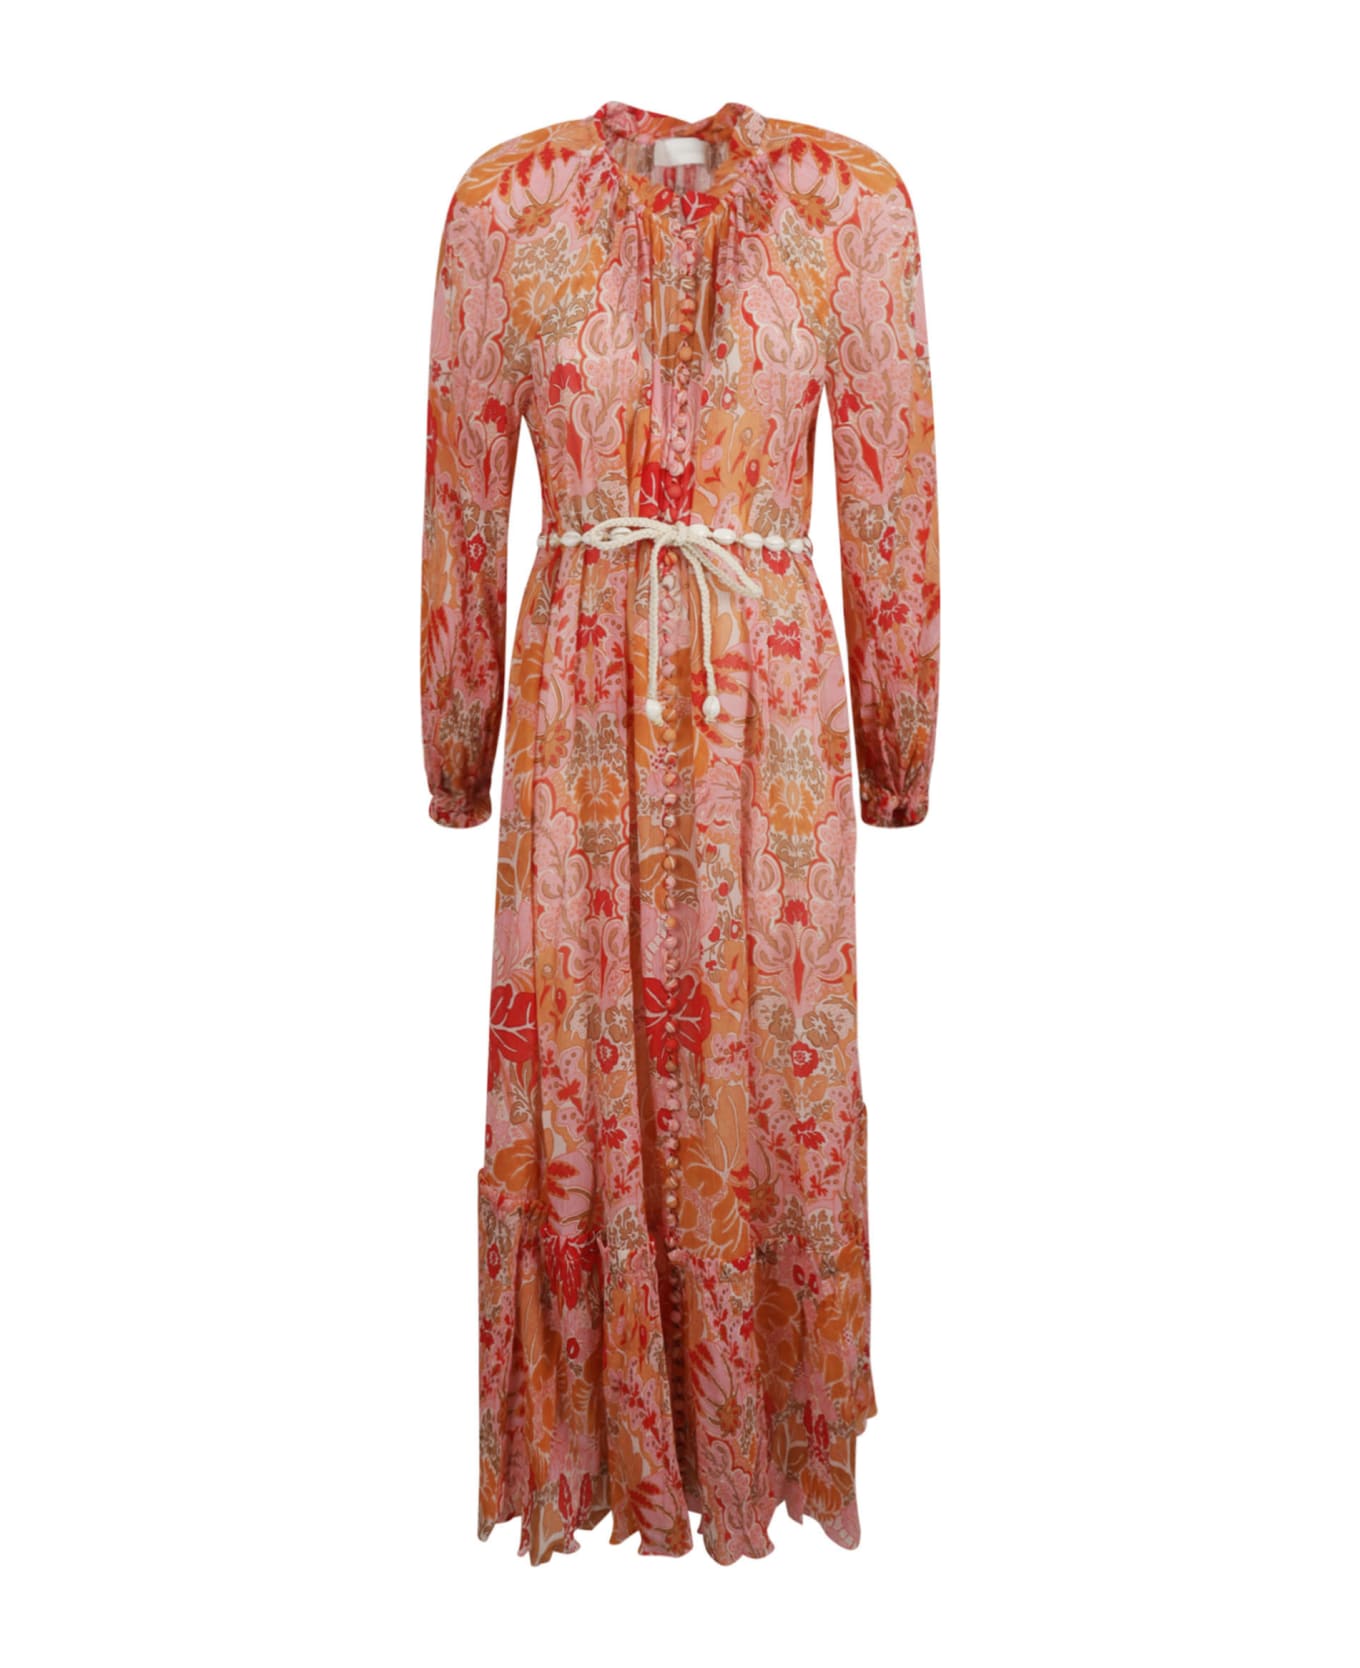 Zimmermann Maxi Belted Dress - Coral Floral